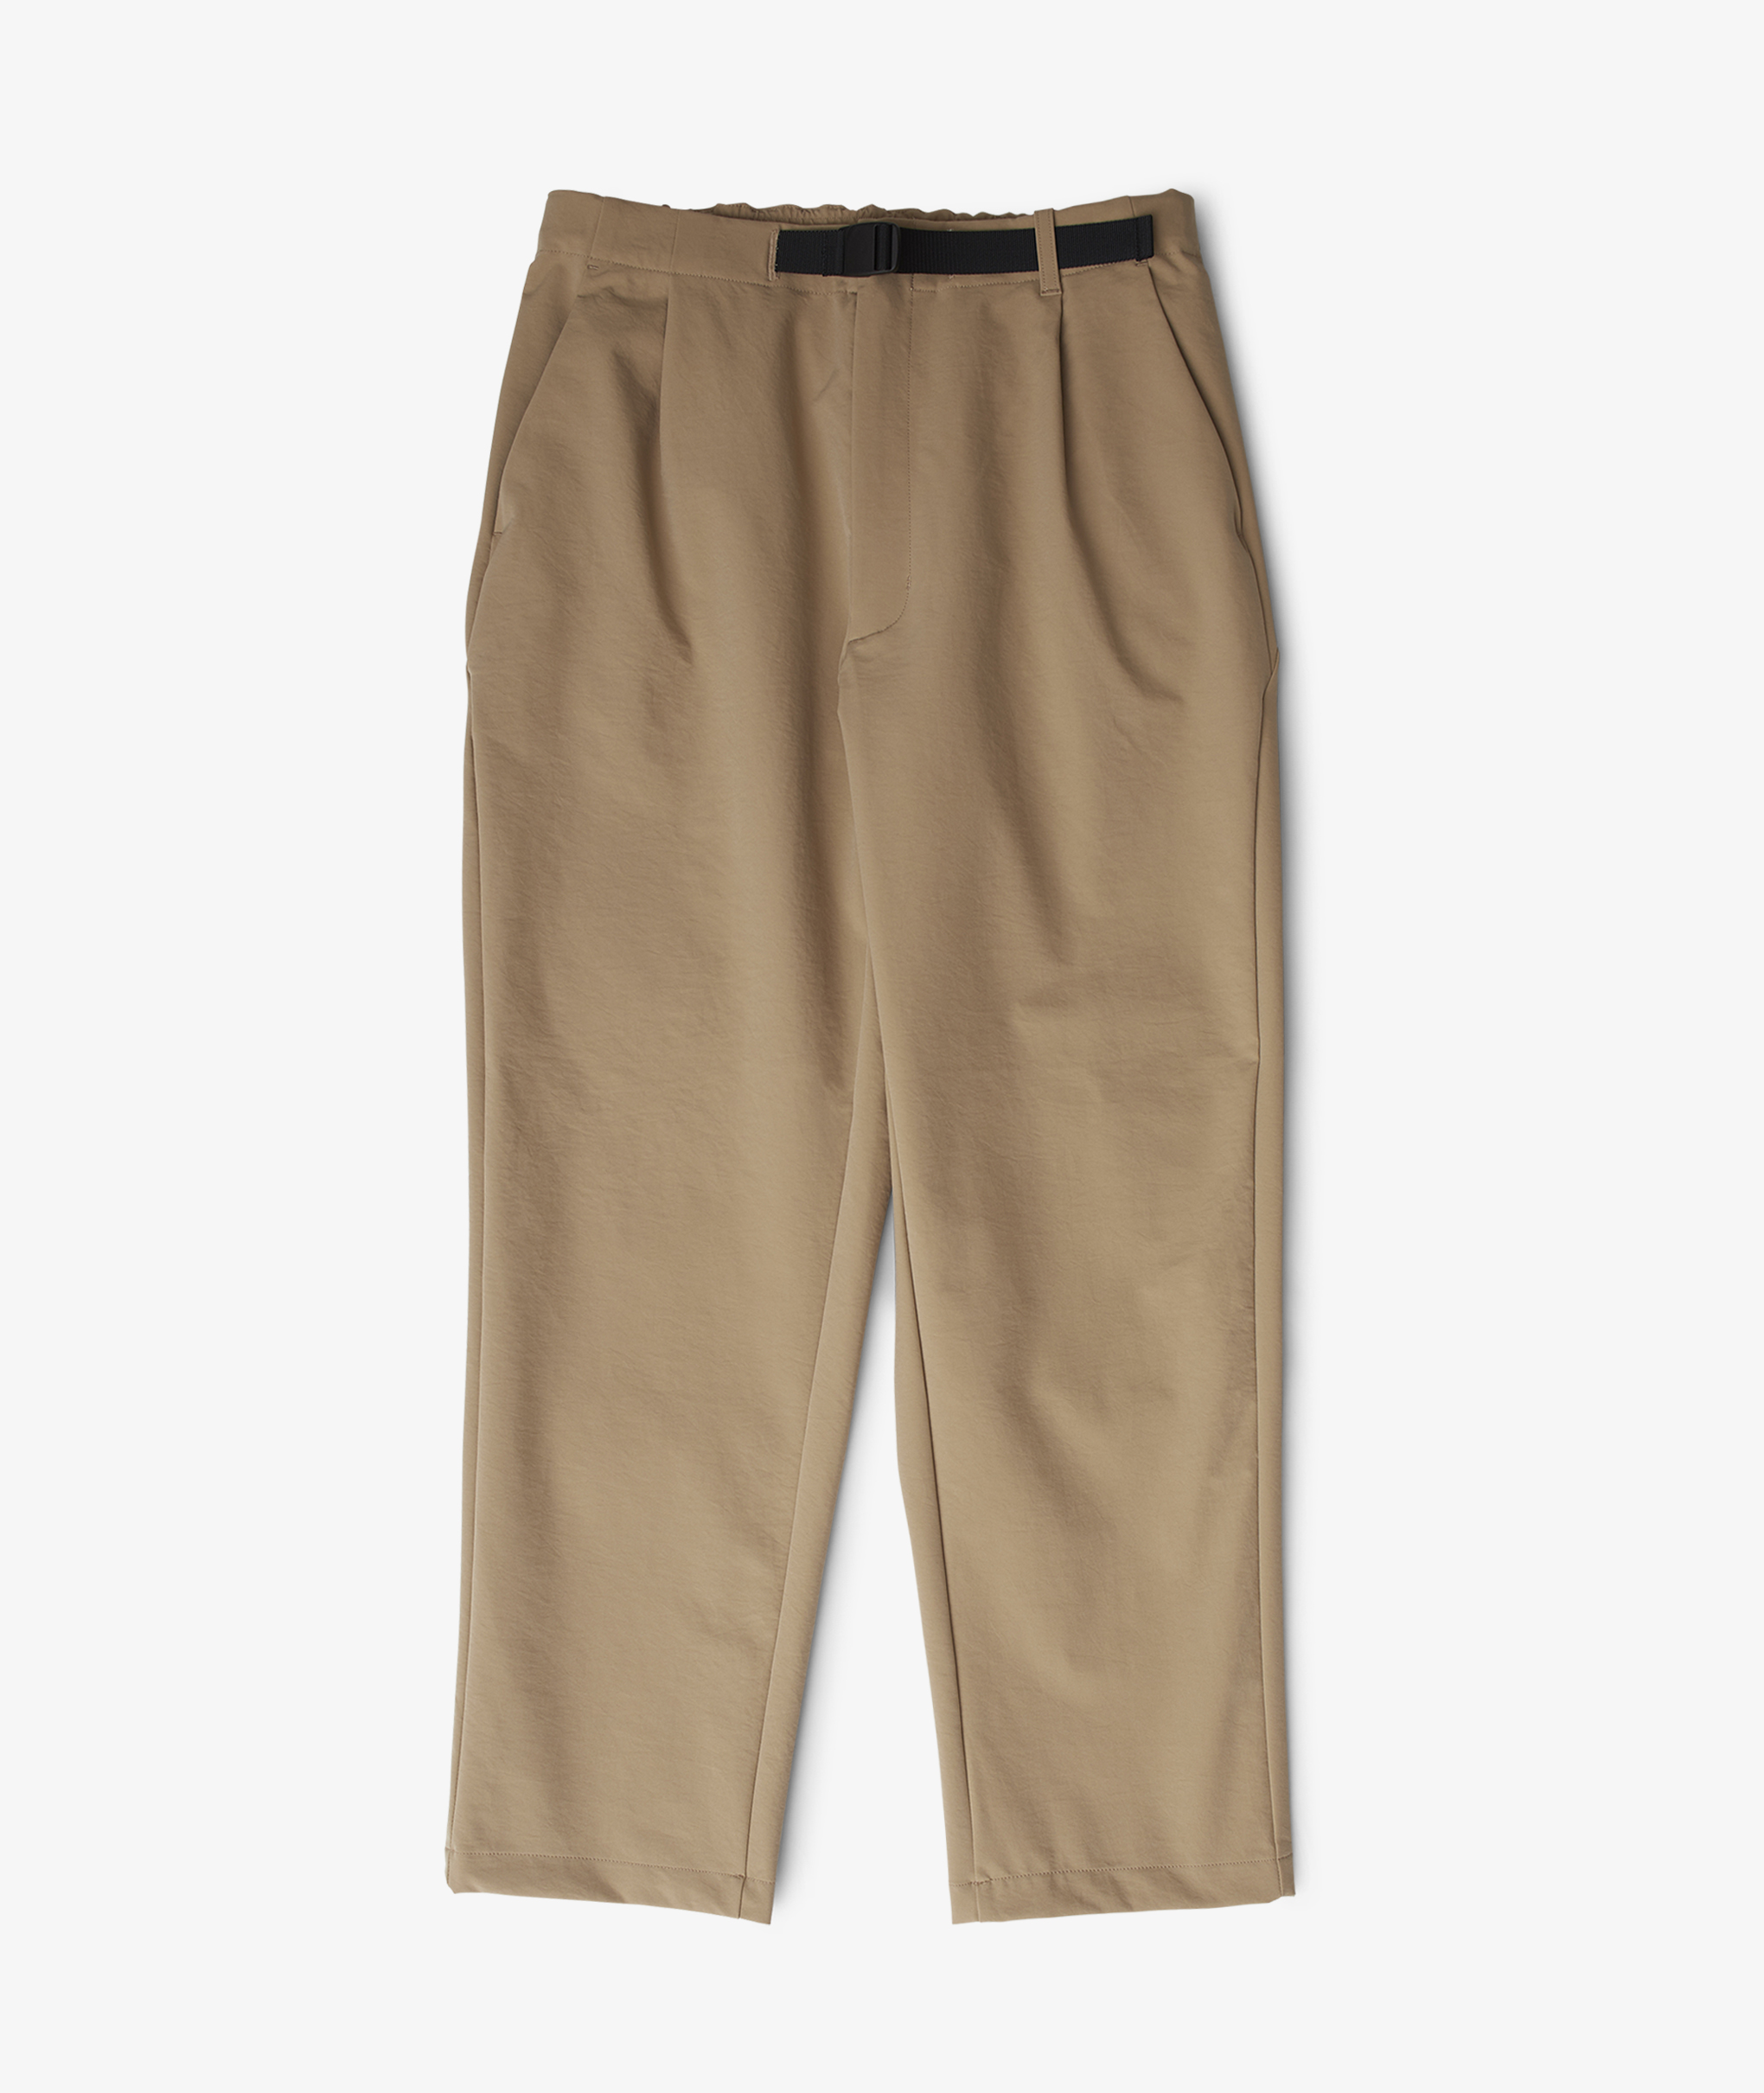 Goldwin One Tuck Tapered Stretch Pants - Clay Beige – The 5th Store